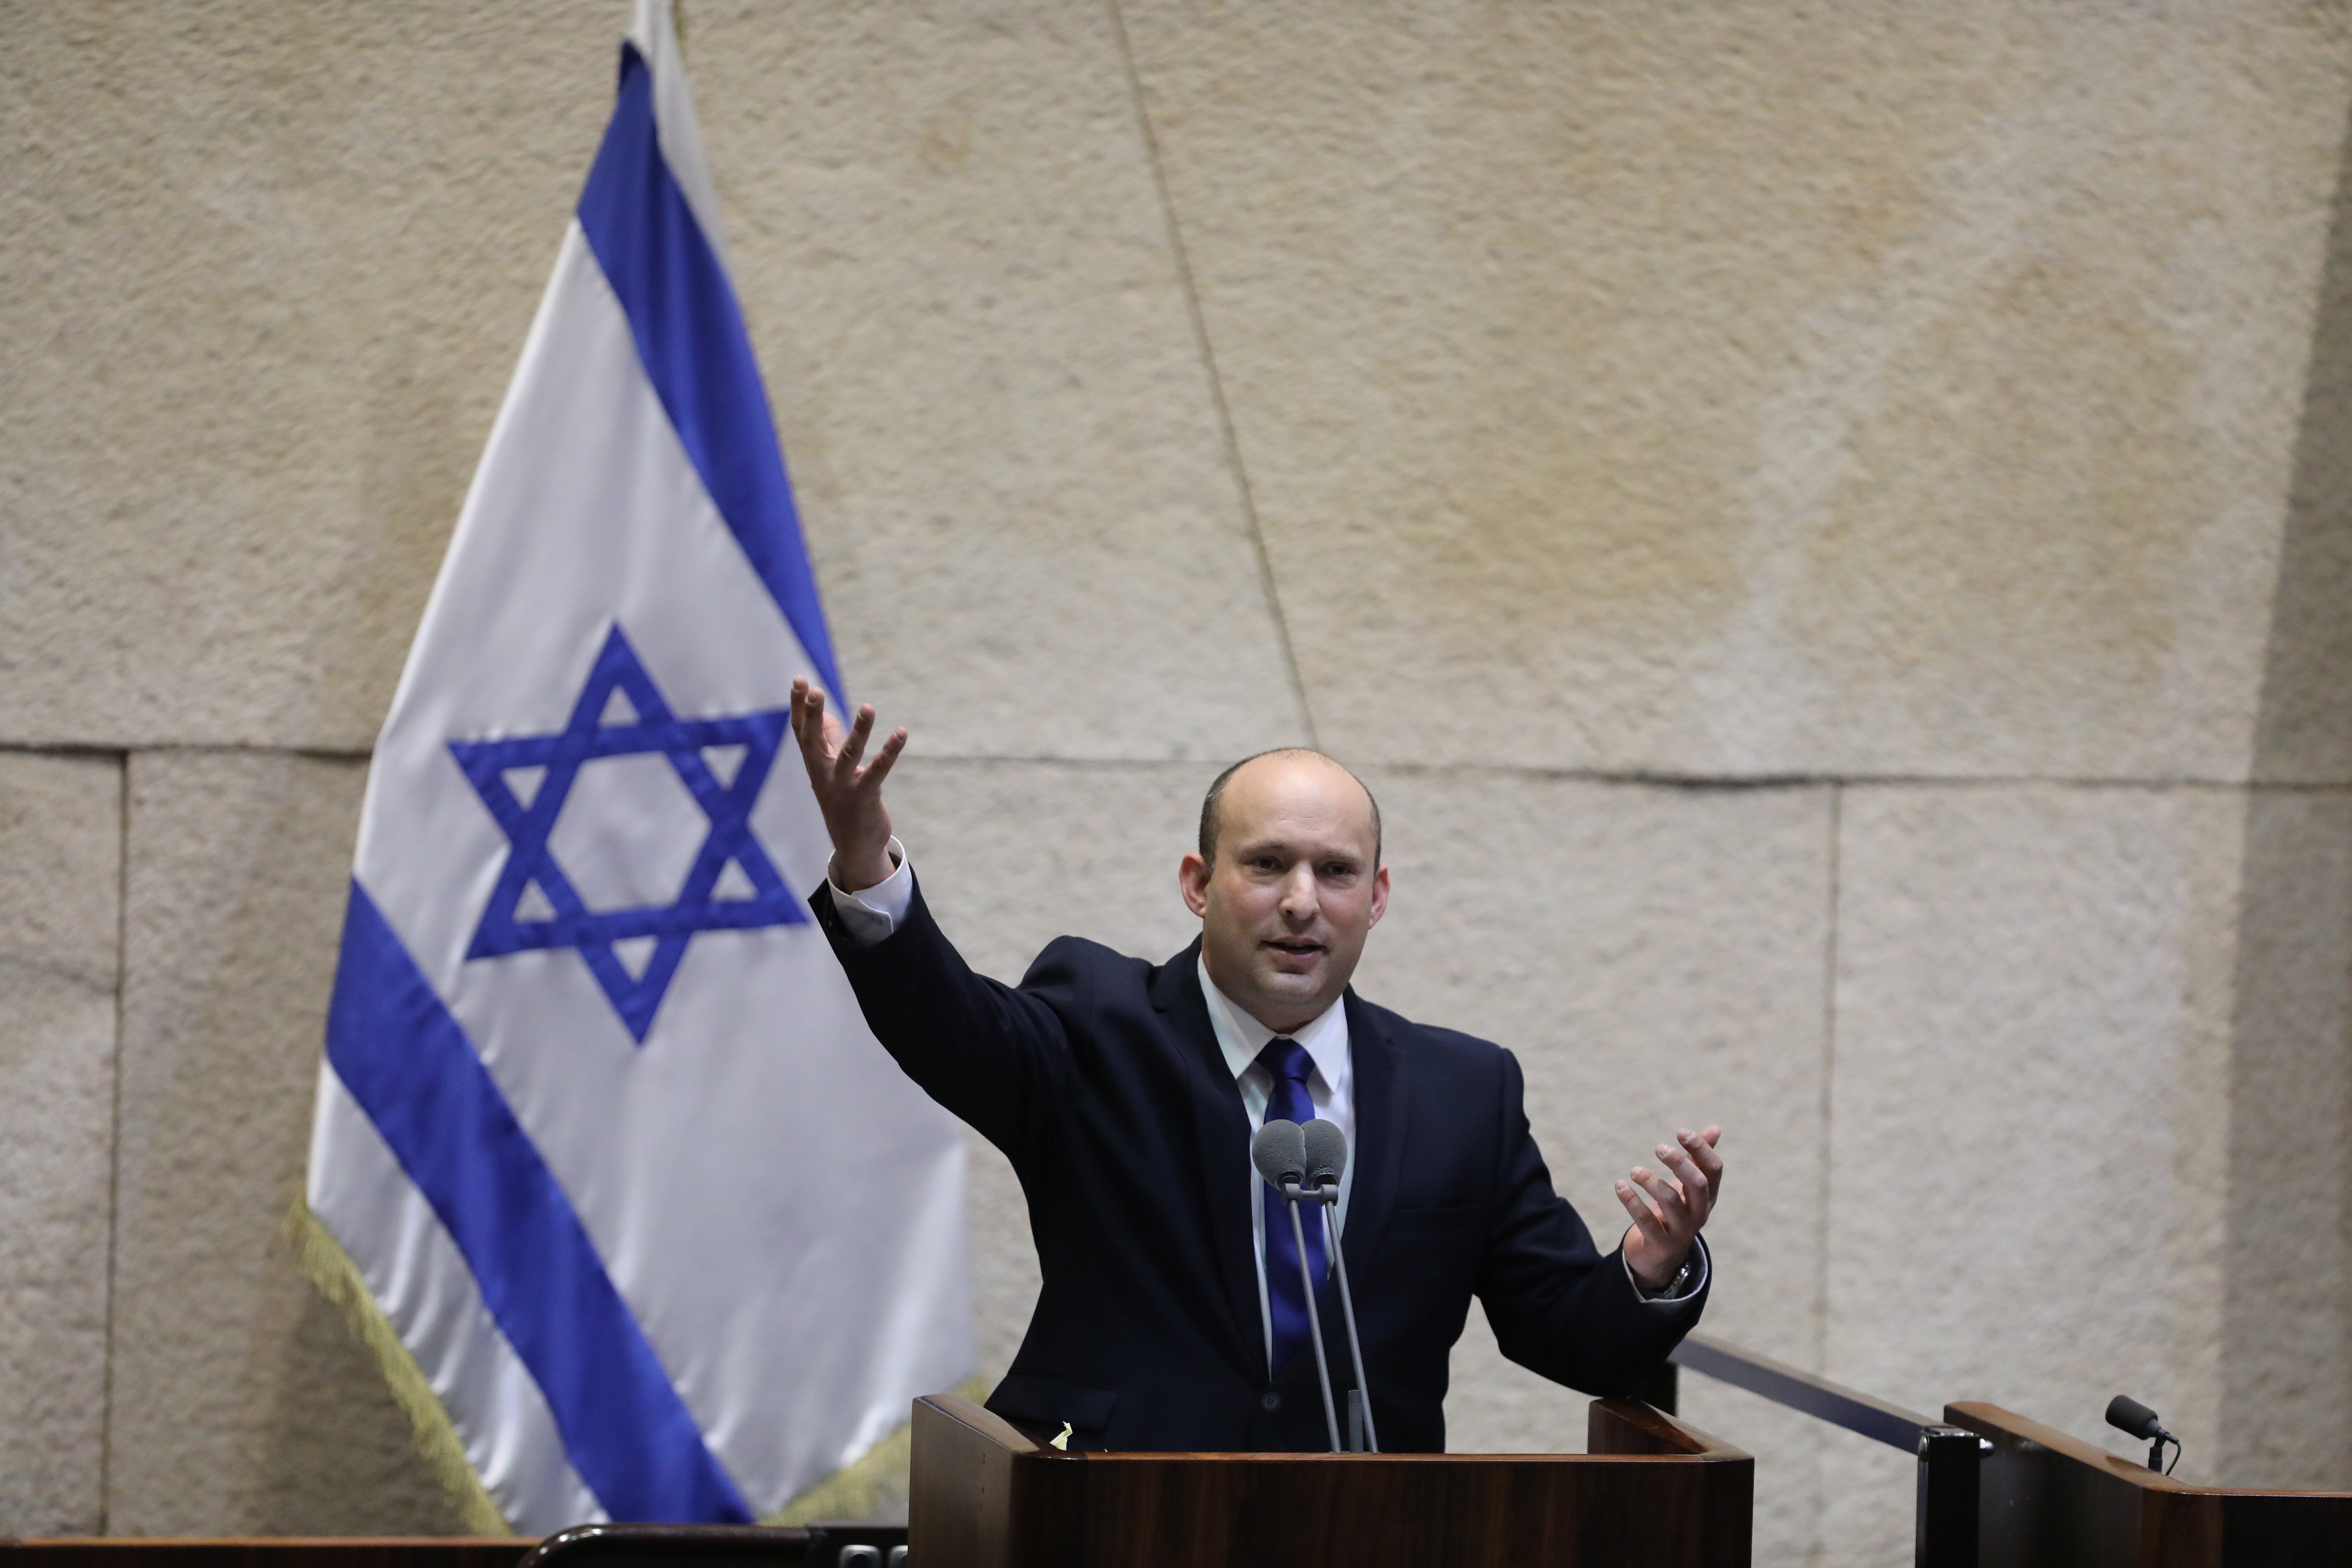 Naftali Bennett speaks during a special voting session on the formation of a new coalition government at the Knesset, the Israeli parliament